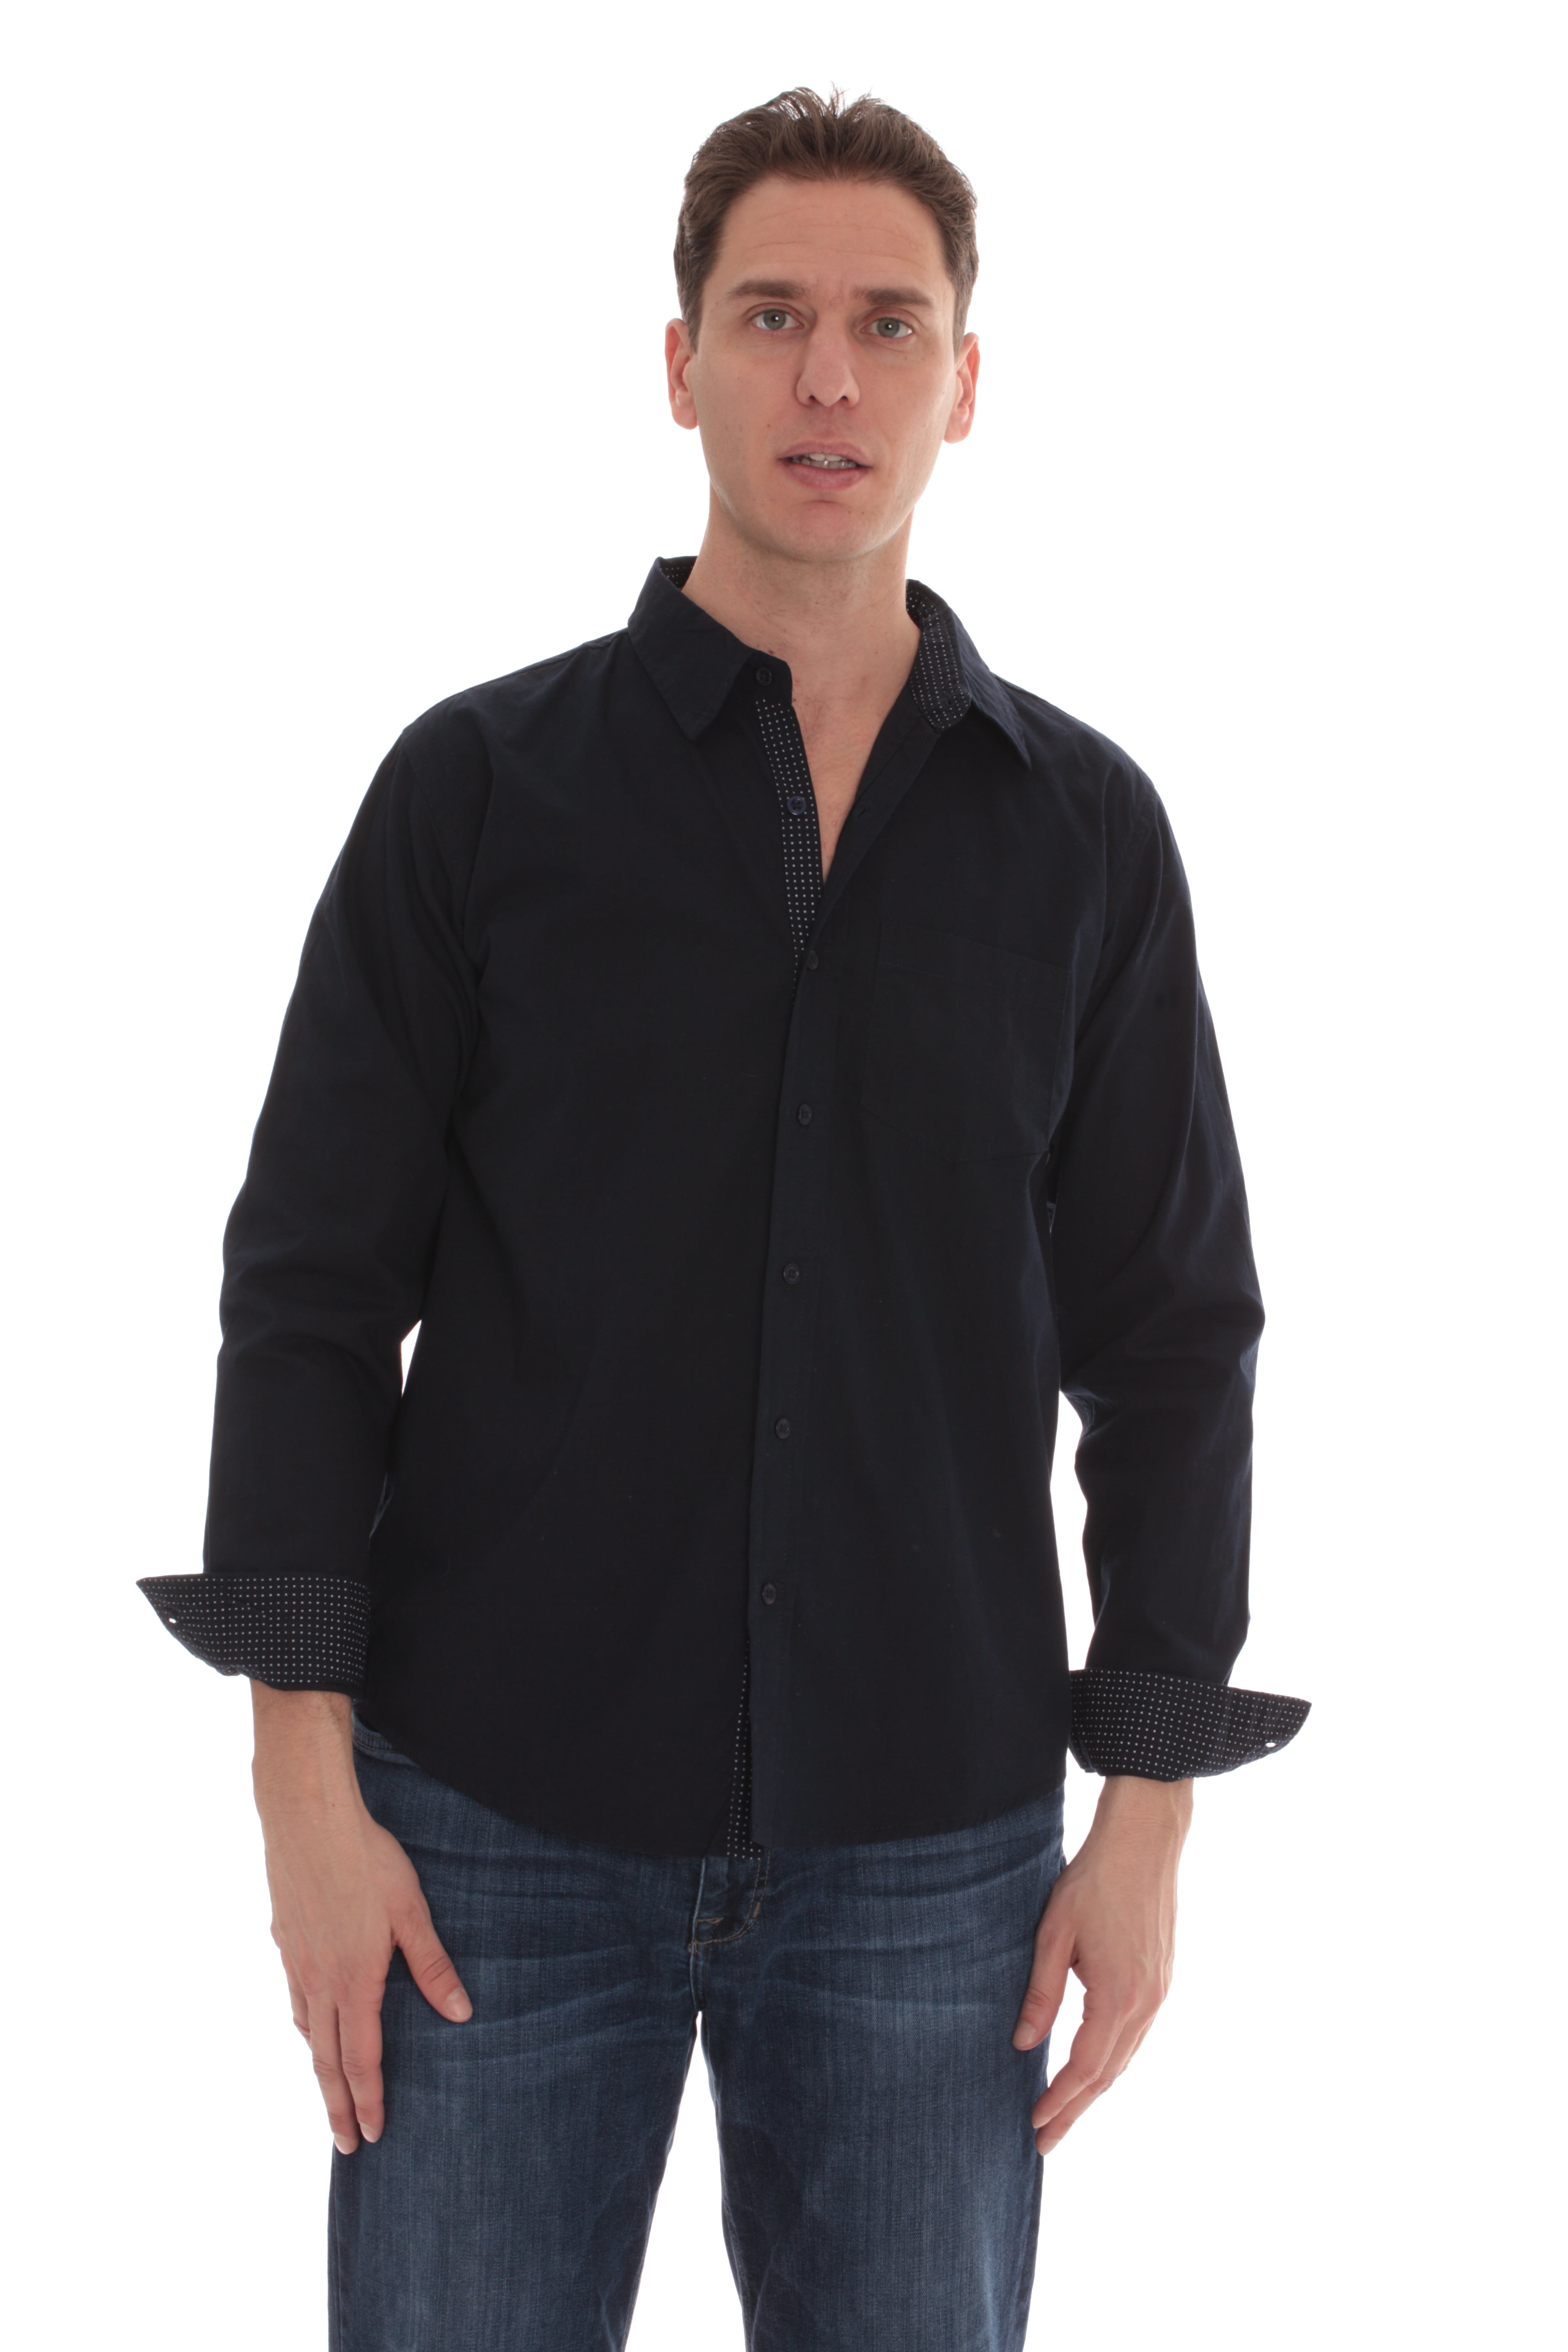 Whiskey & Oak Slim Fit Casual Button Down Shirt for Men